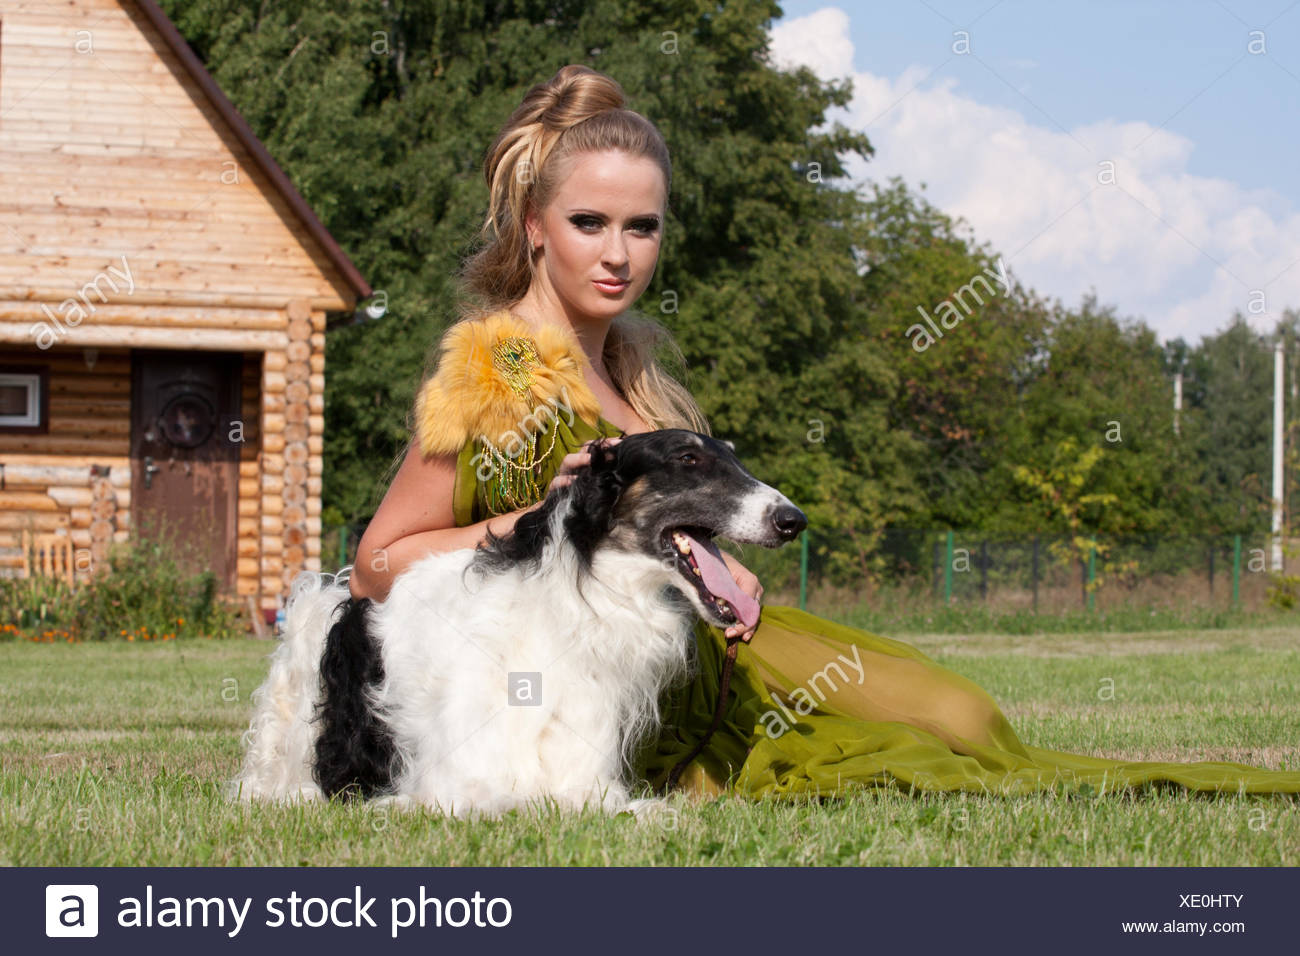 The Woman In A Beautiful Old Style Dress With Borzoi Dogs Stock Photo Alamy